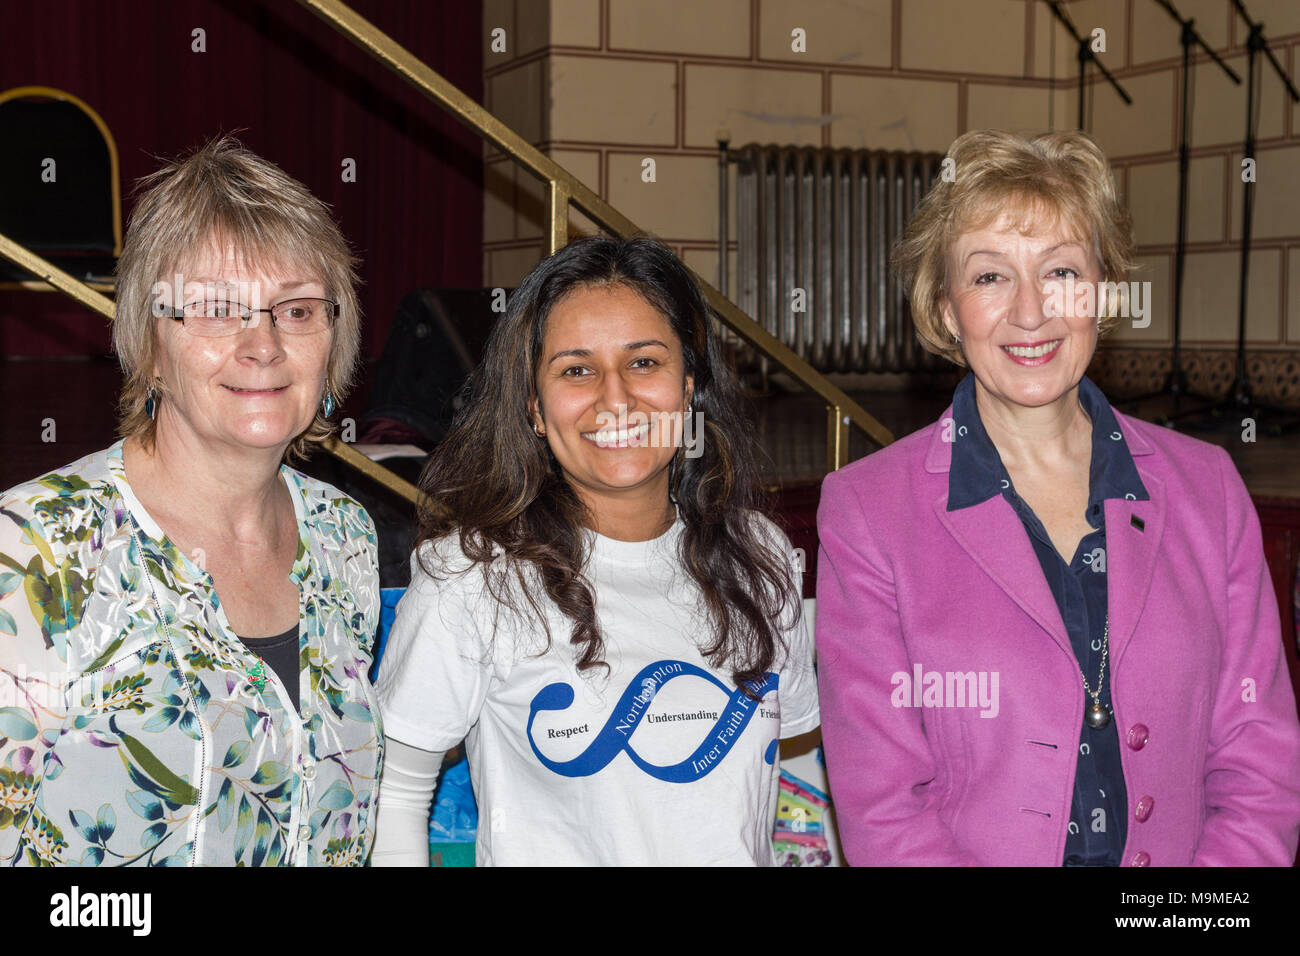 Participants in an International Women's Day event with the local MP Andrea Leadsom on the right; Northampton Guildhall, UK. Stock Photo